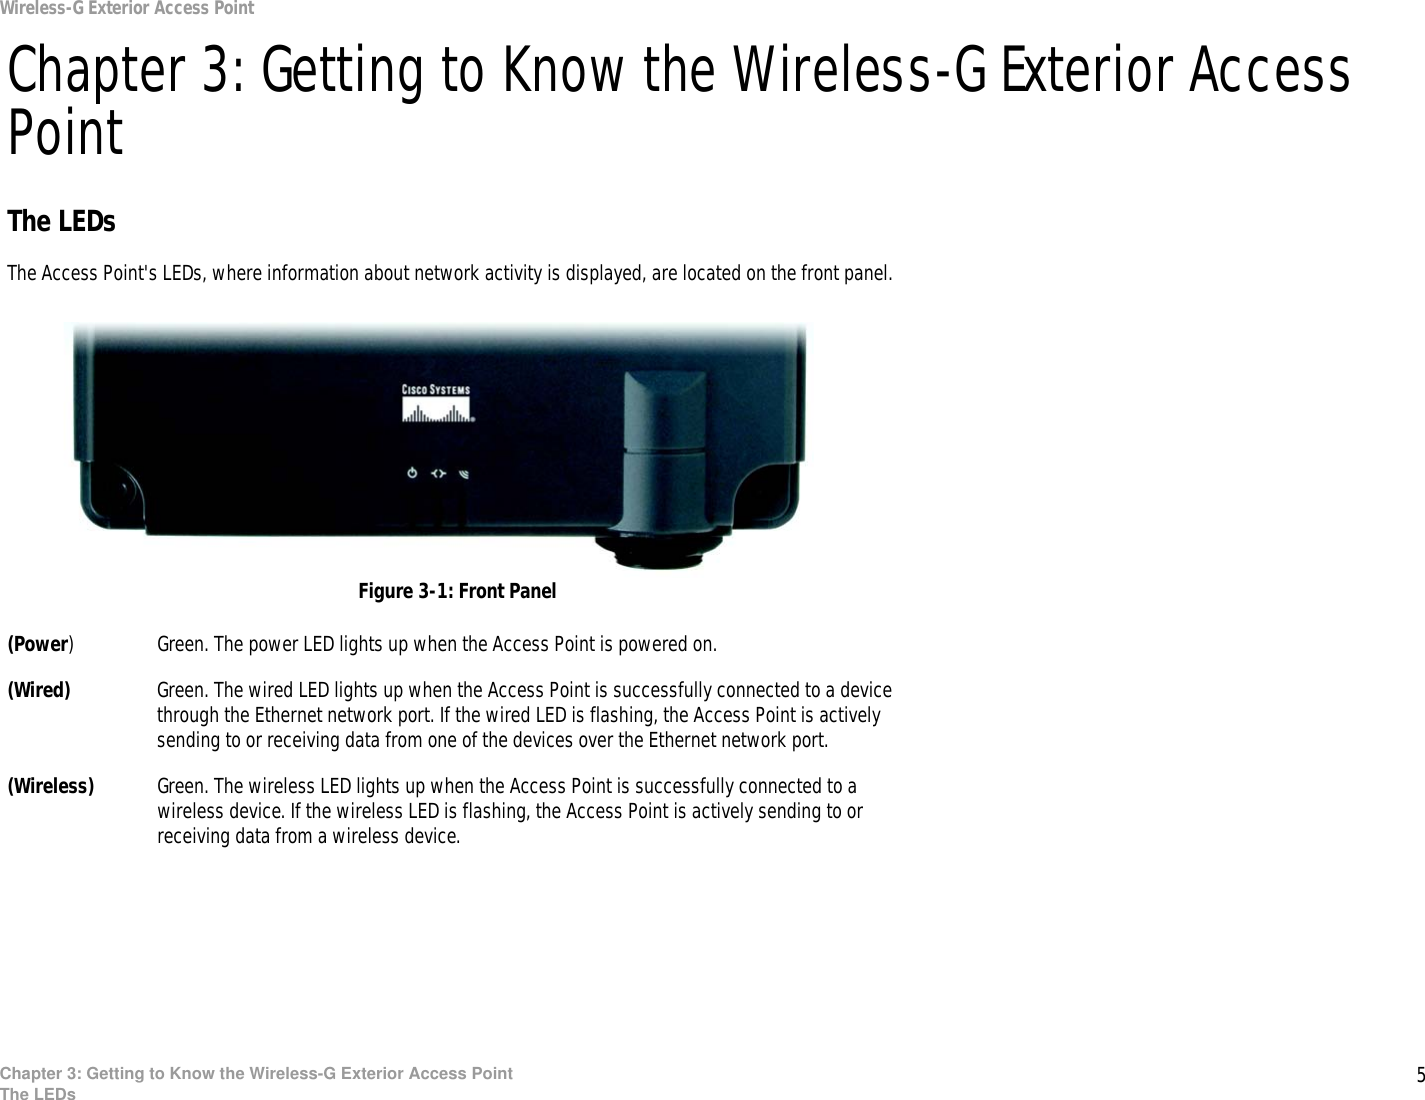 5Chapter 3: Getting to Know the Wireless-G Exterior Access PointThe LEDsWireless-G Exterior Access PointChapter 3: Getting to Know the Wireless-G Exterior Access PointThe LEDsThe Access Point&apos;s LEDs, where information about network activity is displayed, are located on the front panel.(Power) Green. The power LED lights up when the Access Point is powered on.(Wired) Green. The wired LED lights up when the Access Point is successfully connected to a device through the Ethernet network port. If the wired LED is flashing, the Access Point is actively sending to or receiving data from one of the devices over the Ethernet network port.(Wireless) Green. The wireless LED lights up when the Access Point is successfully connected to a wireless device. If the wireless LED is flashing, the Access Point is actively sending to or receiving data from a wireless device.Figure 3-1: Front Panel